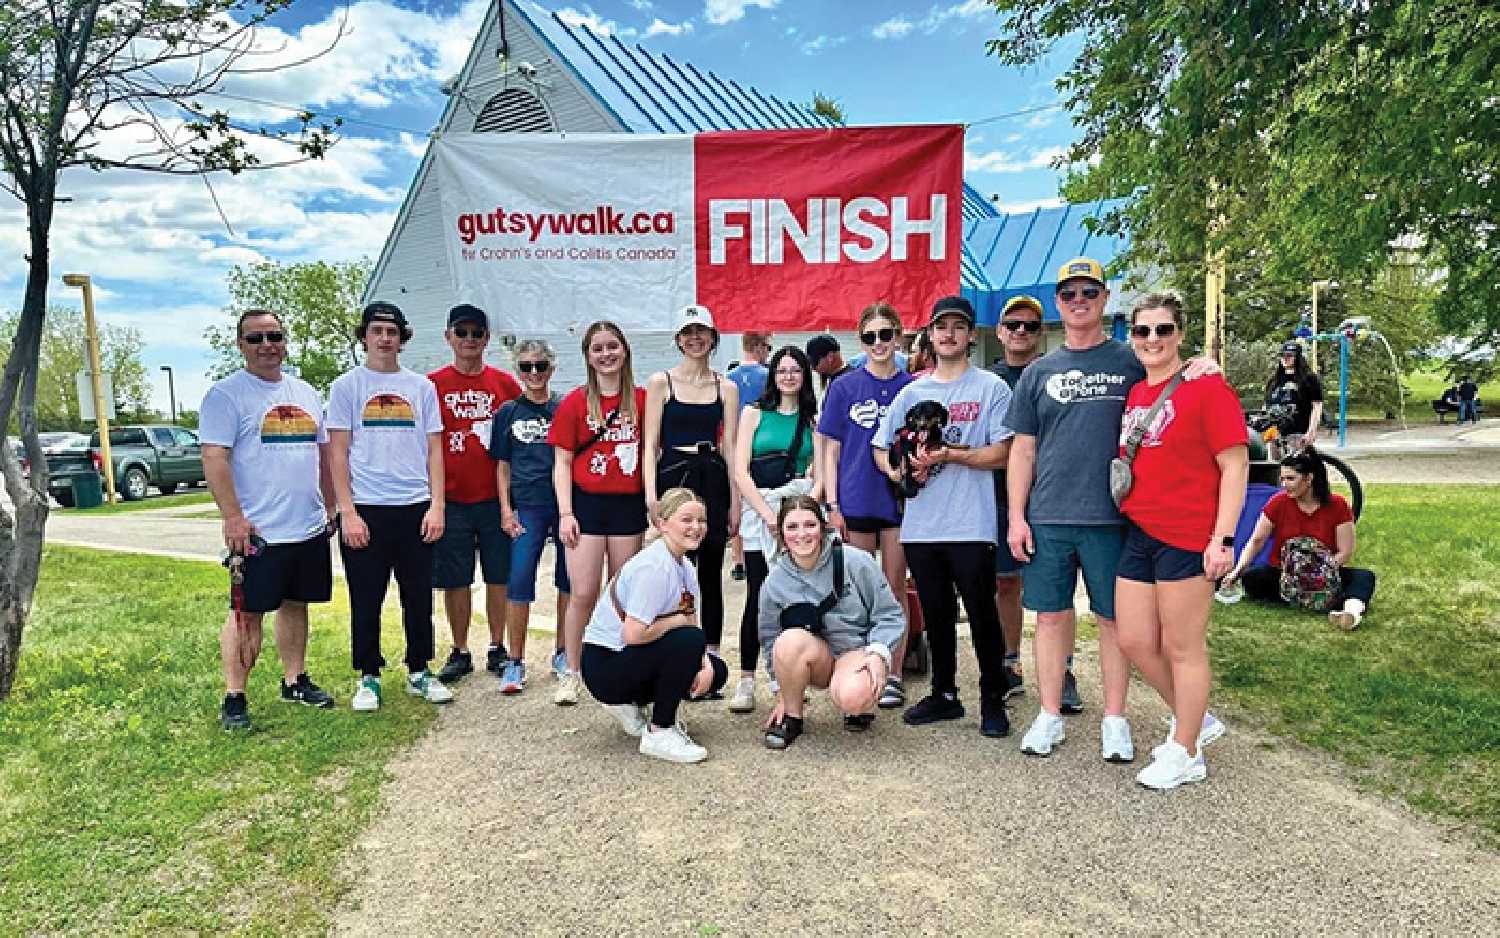 Charlie Leslie, Nancy Apshkrum and all the participants from Moosomin who took part in the Gutsy Walk in Regina Sunday, June 2.